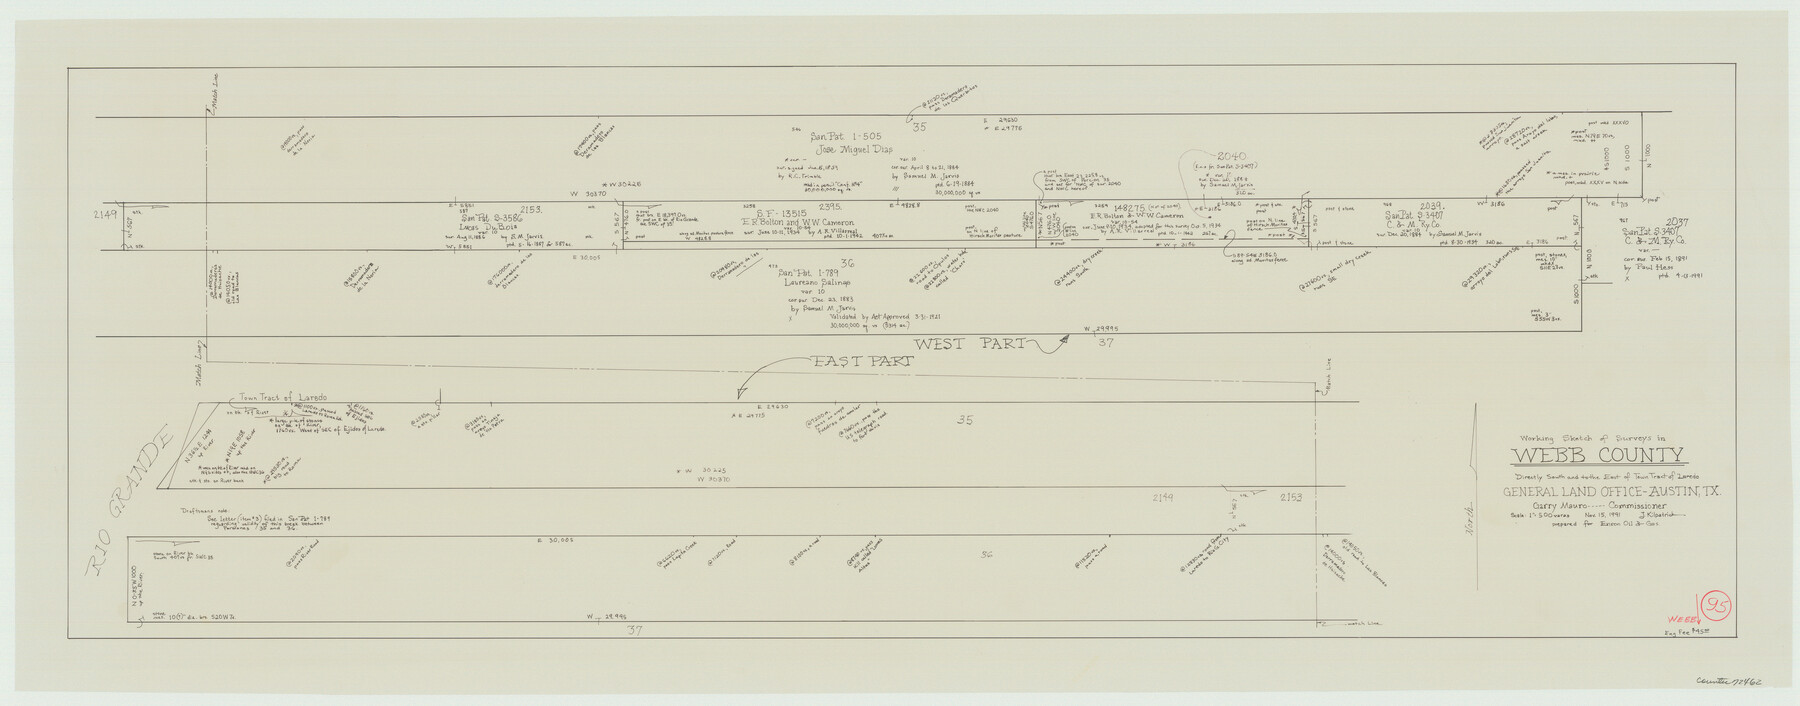 72462, Webb County Working Sketch 95, General Map Collection